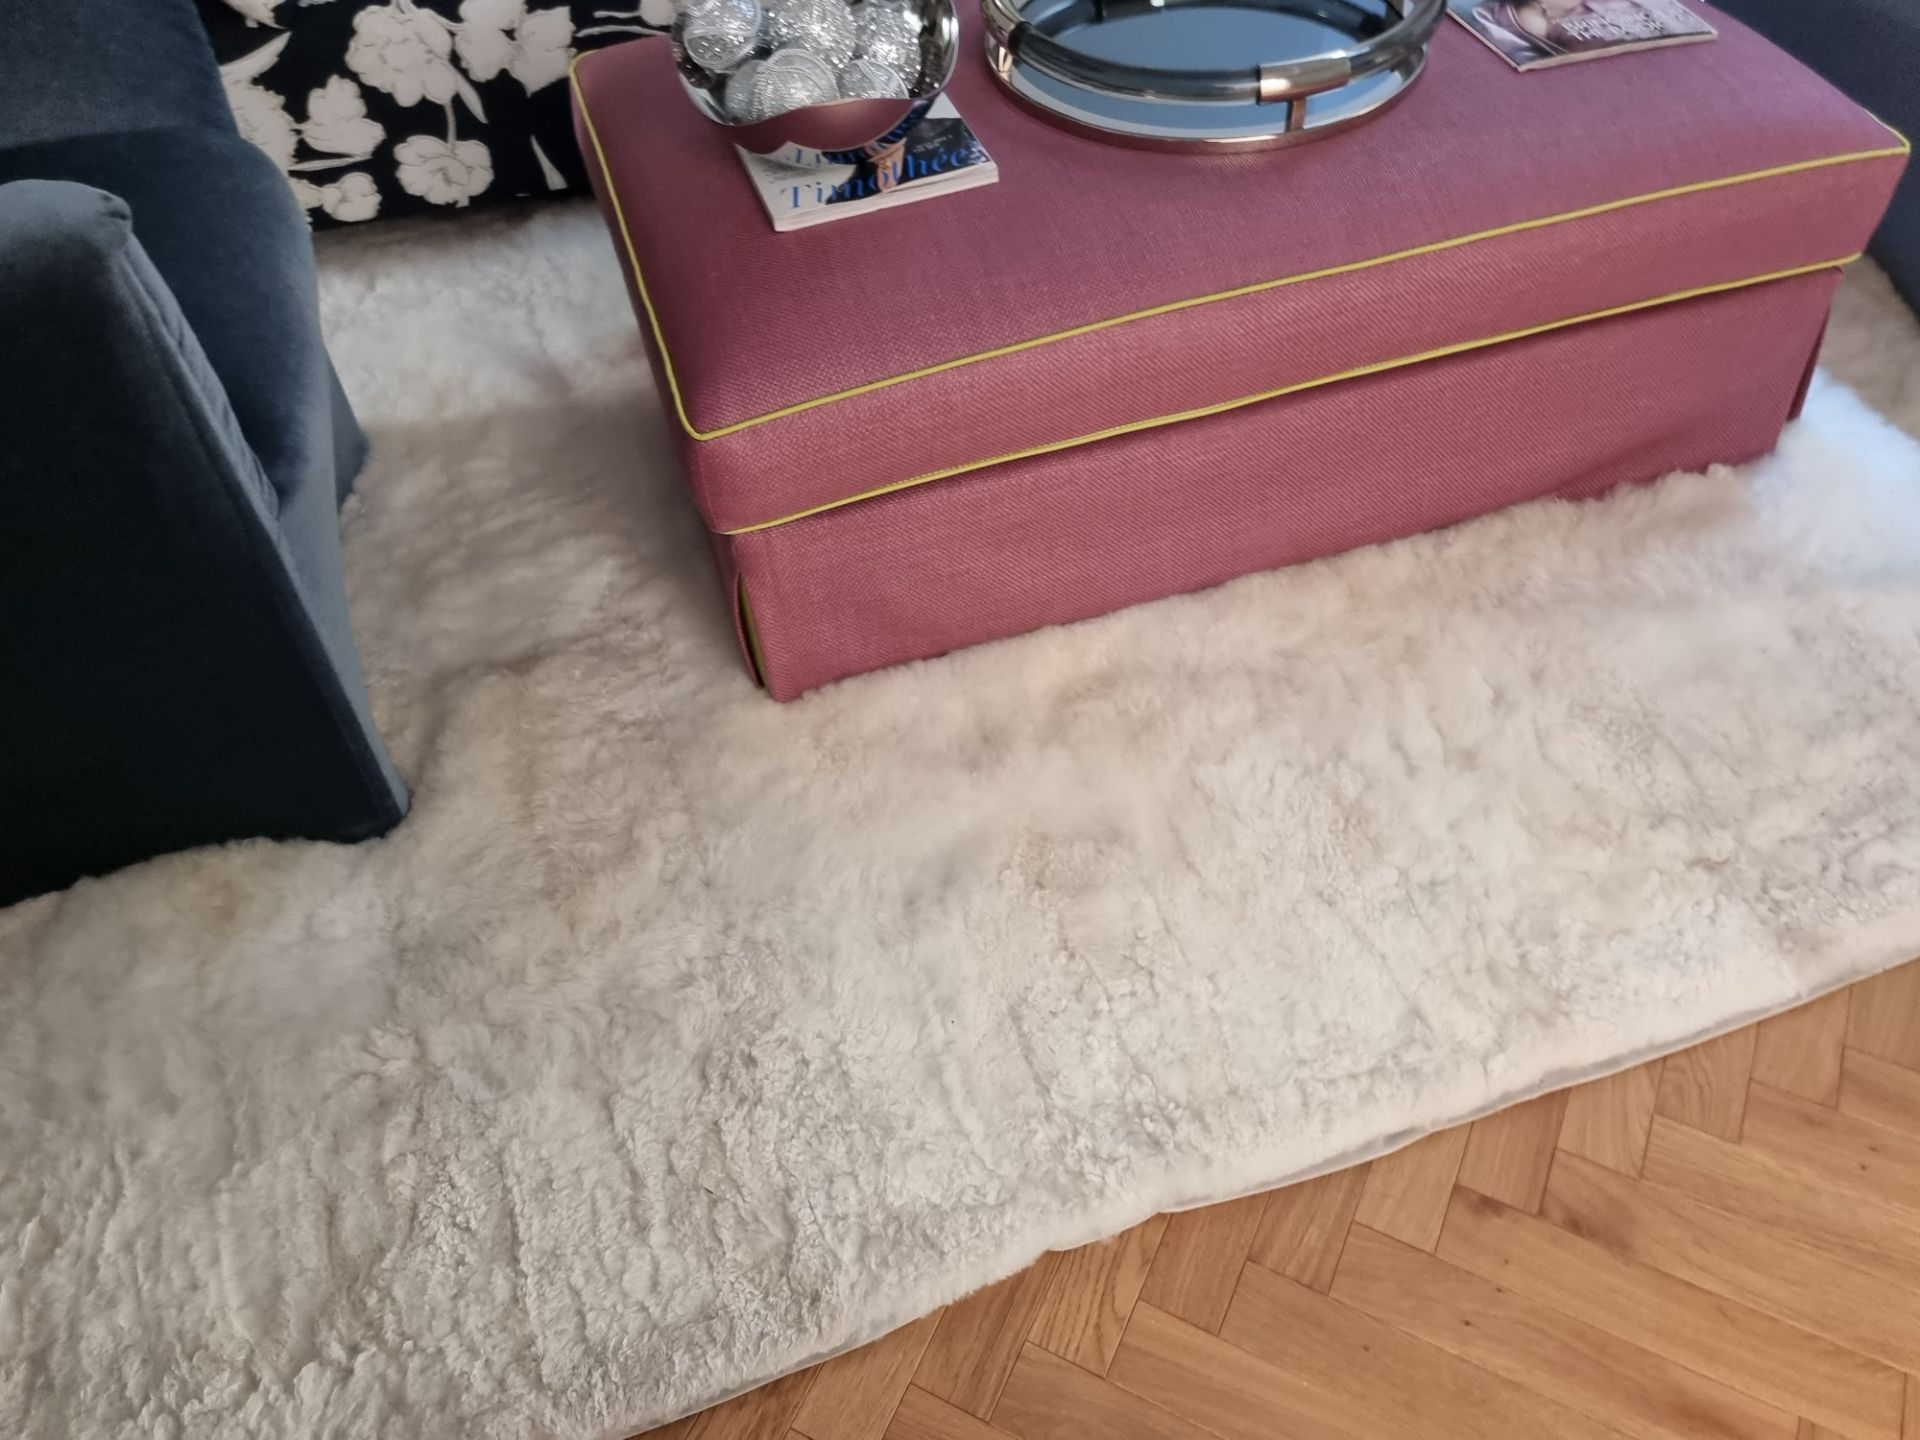 Alpaca Yarn Bespoke Rug Experience The Ultimate Softness With Our Handcrafted Carpets And Rugs